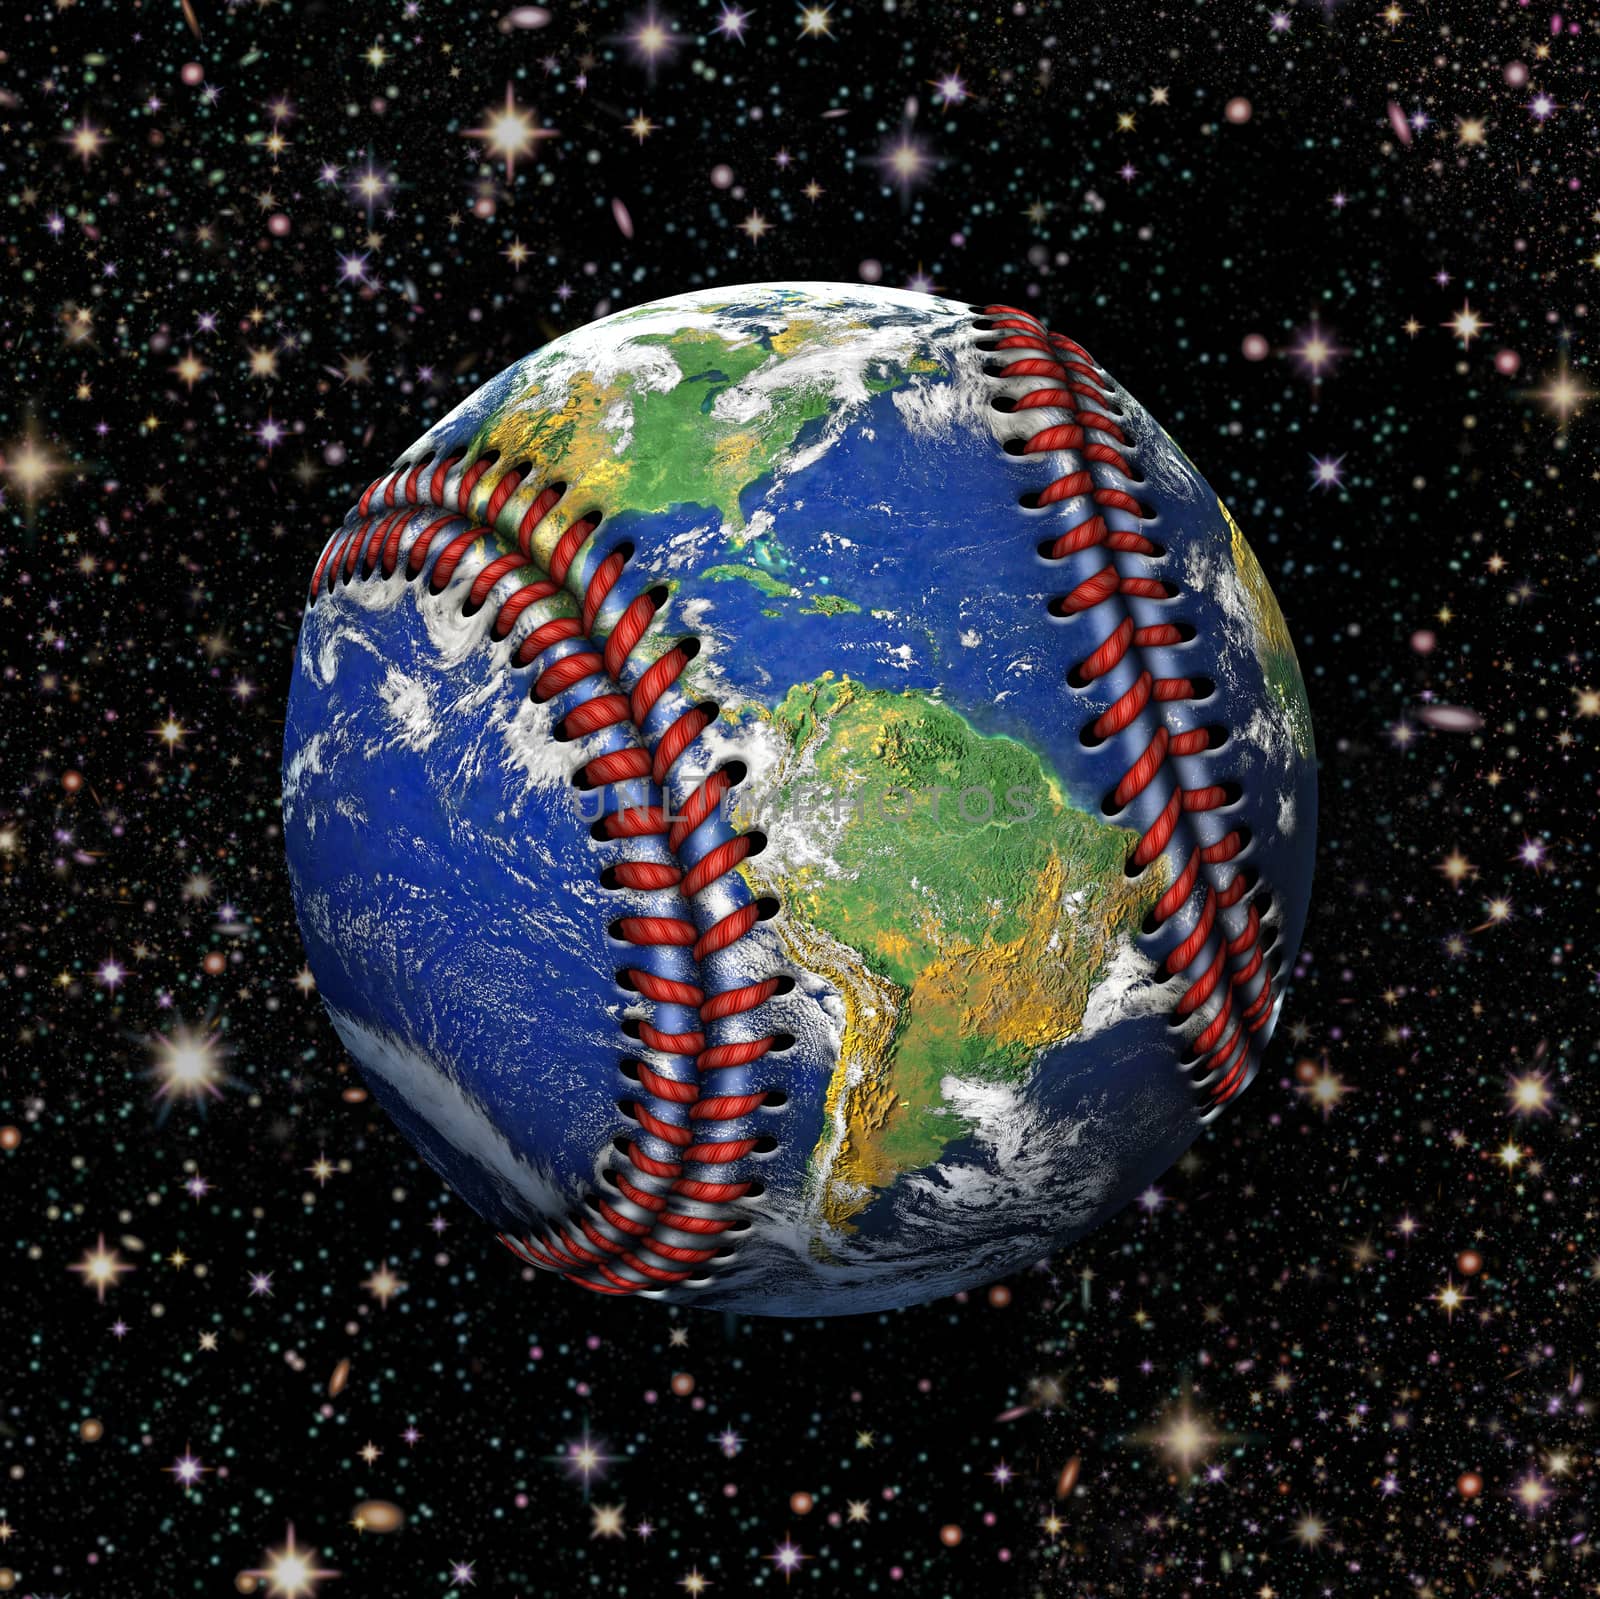 3D Illustration of the planet earth as a baseball with stars in the background.   